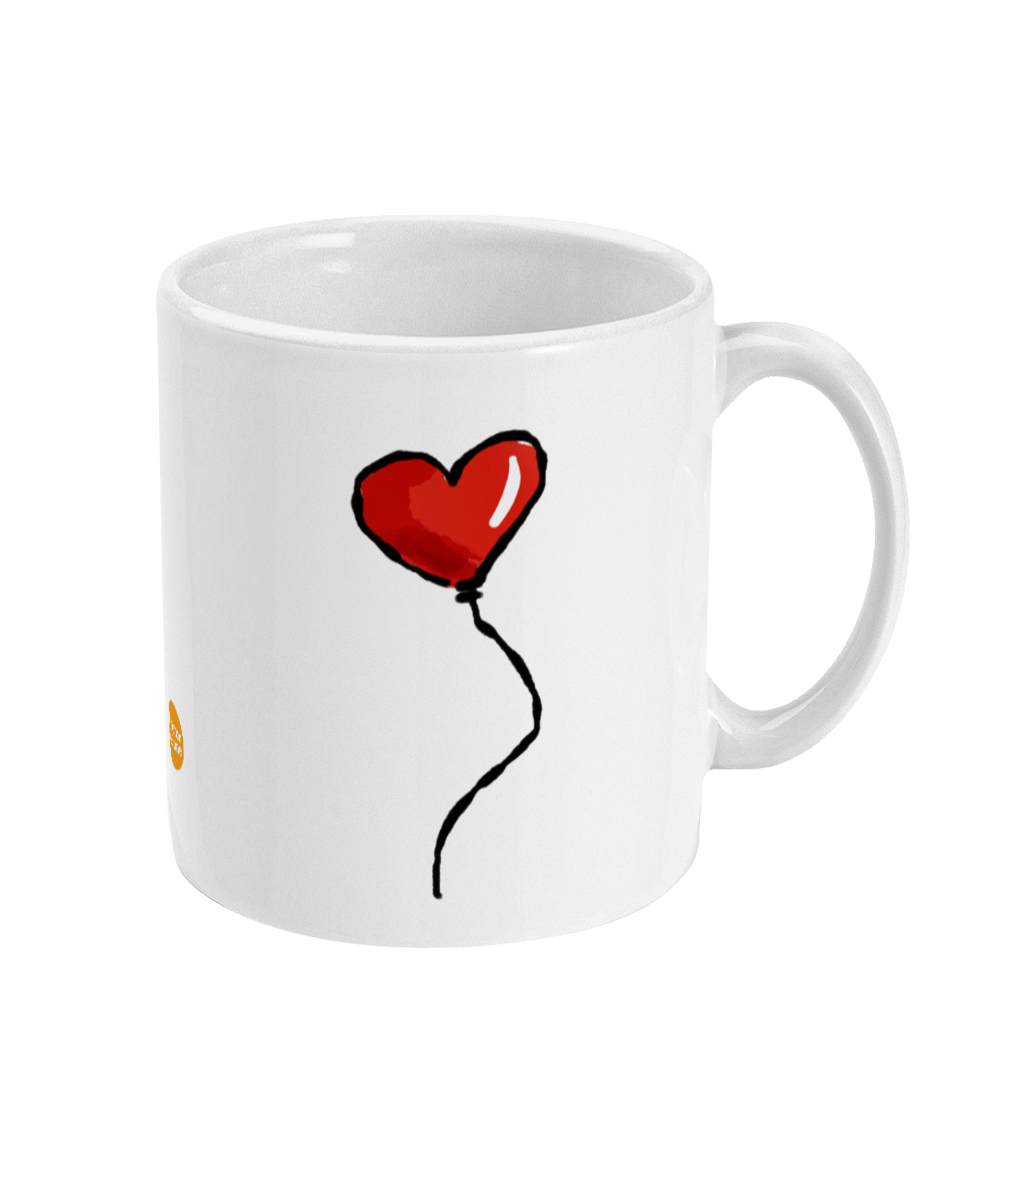 Red Heart Mug - Red Heart illustrated coffee mug by Hector and Bone Right View